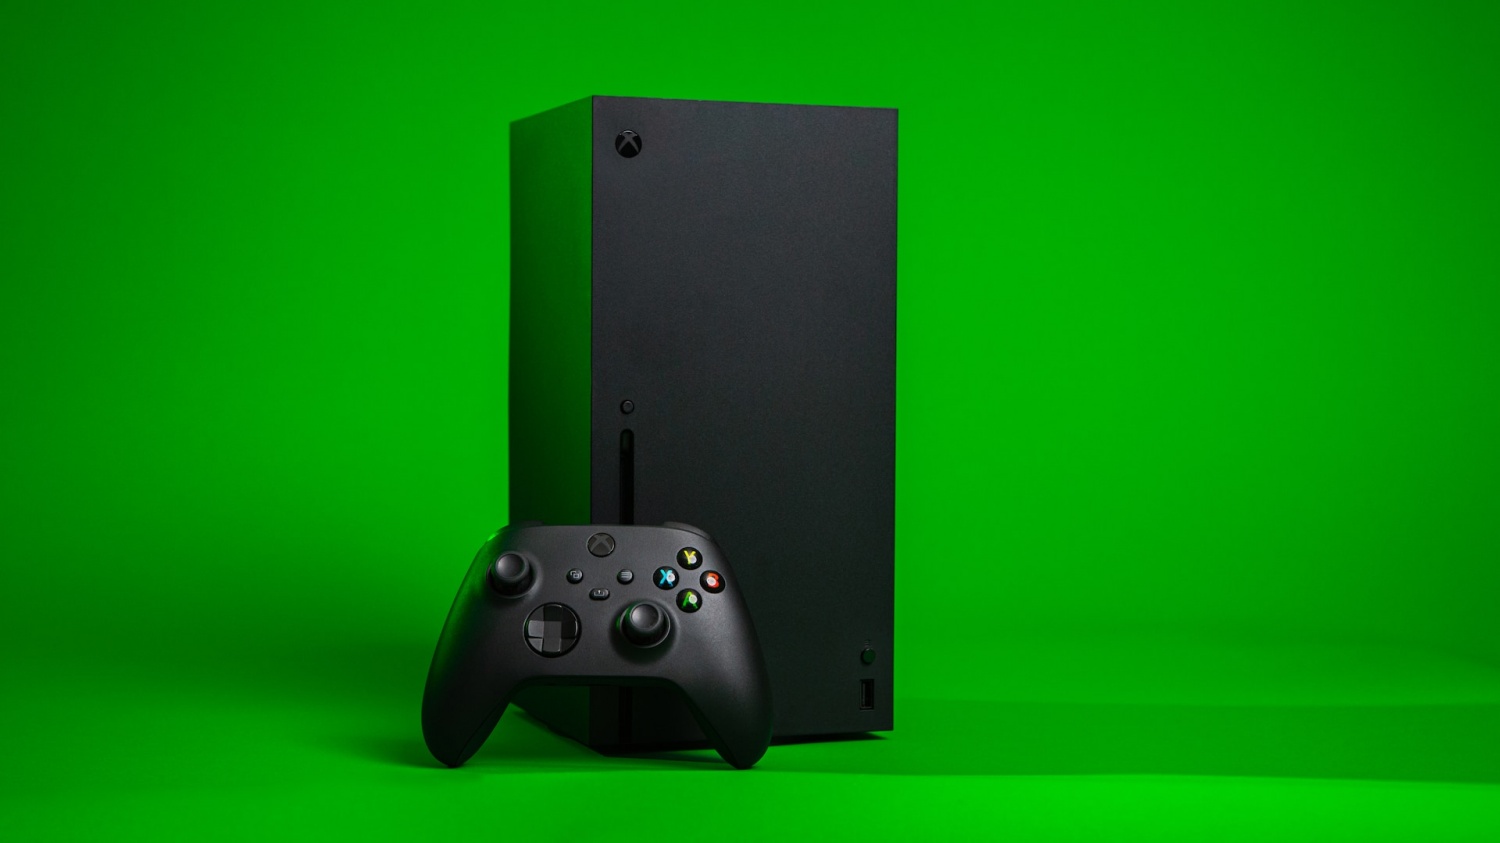 Microsoft Claims Xbox is Behind PlayStation, Nintendo in 'Console Wars'